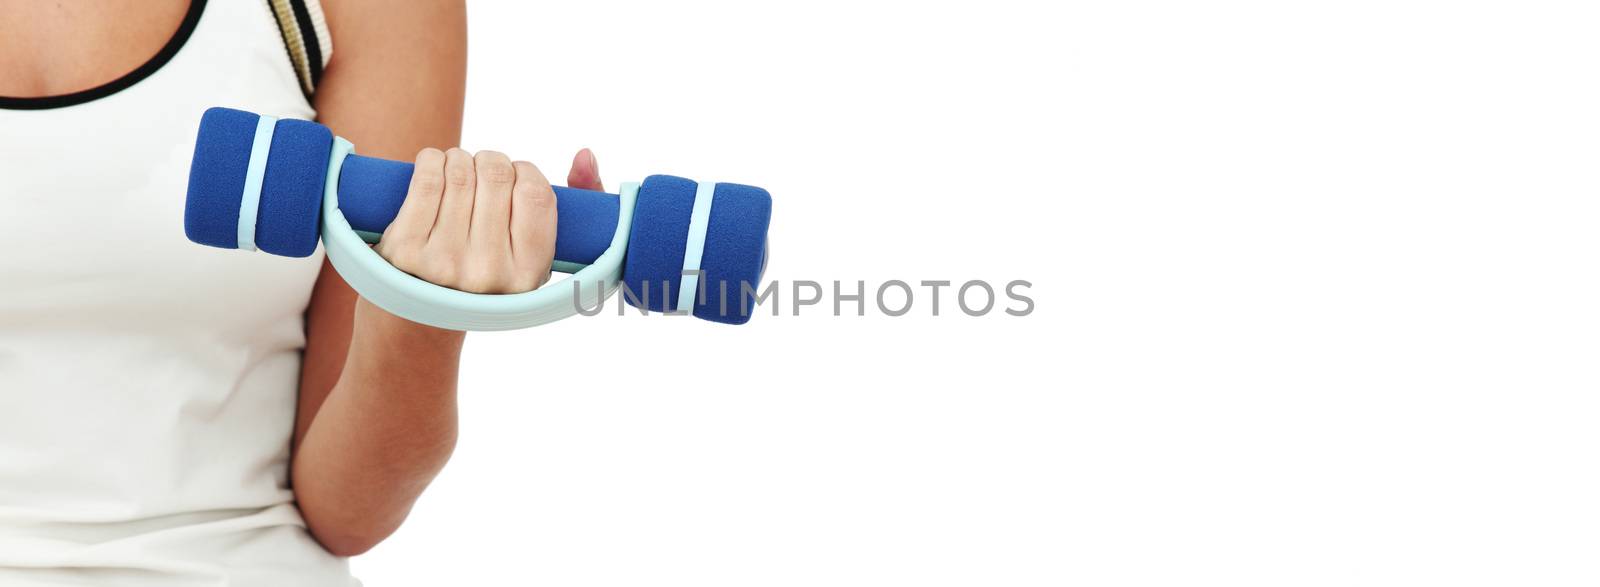 Female hand holding a dumbbell isolated on white background